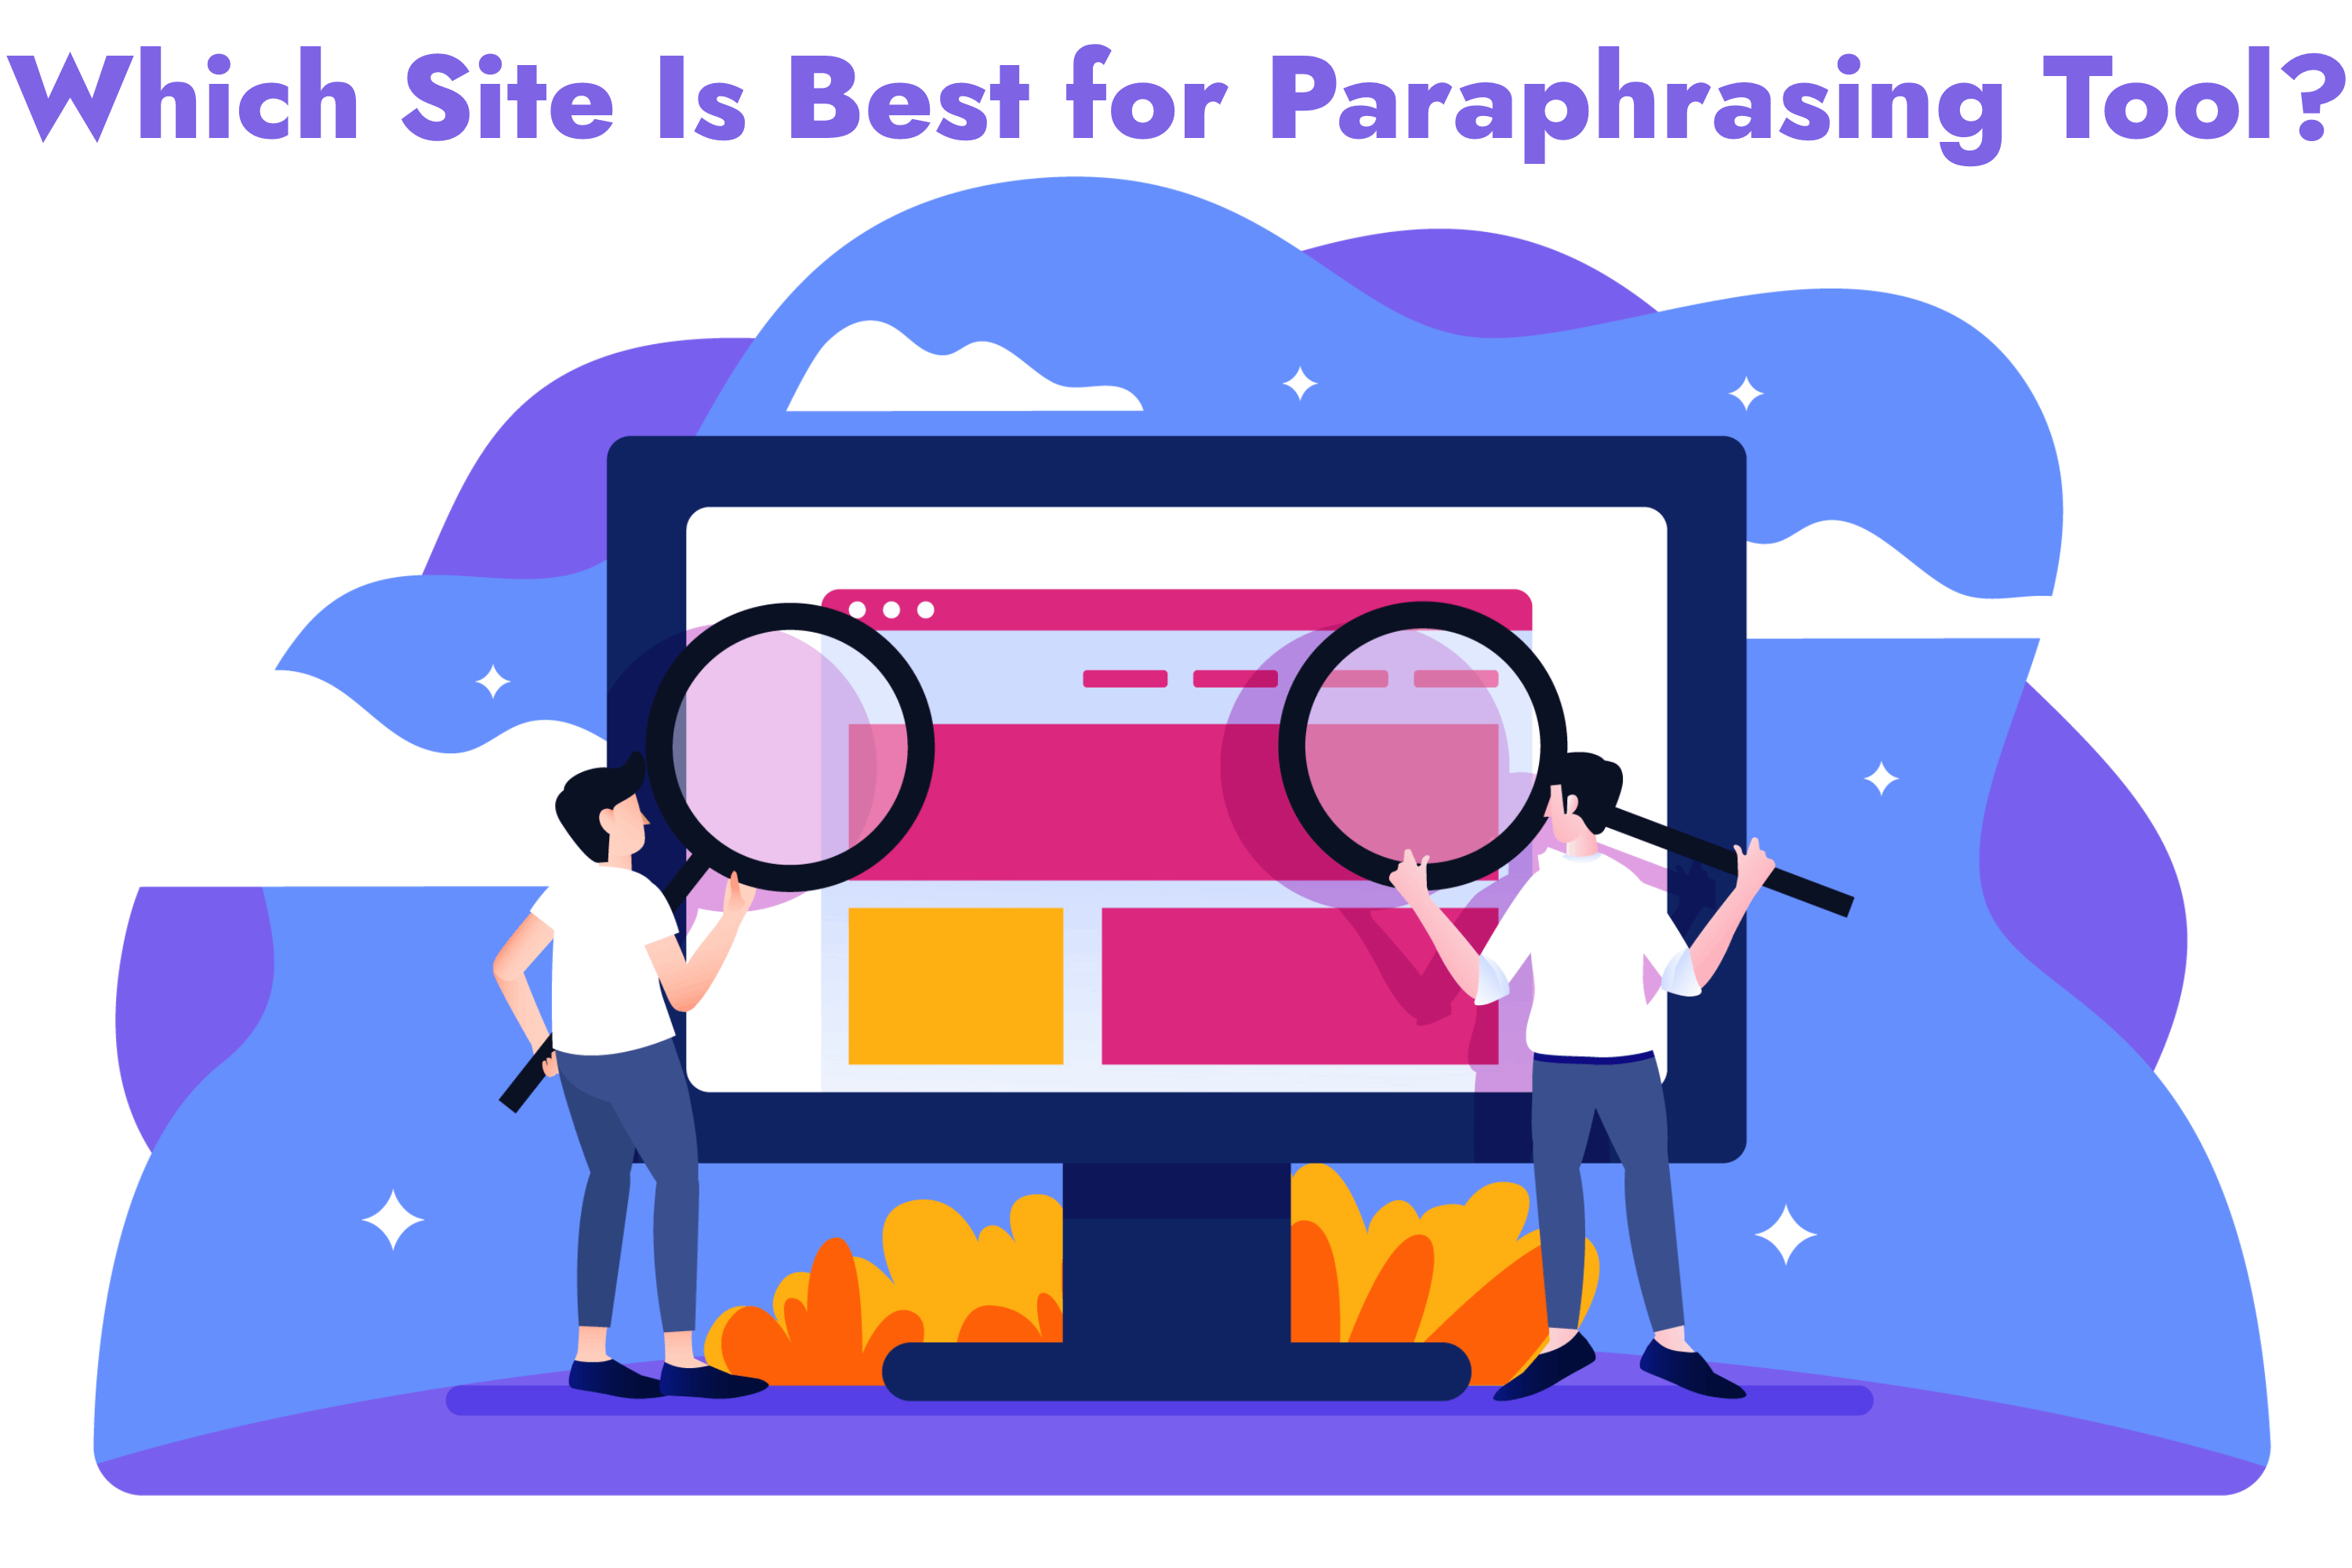 Which Site Is Best for Paraphrasing Tool?